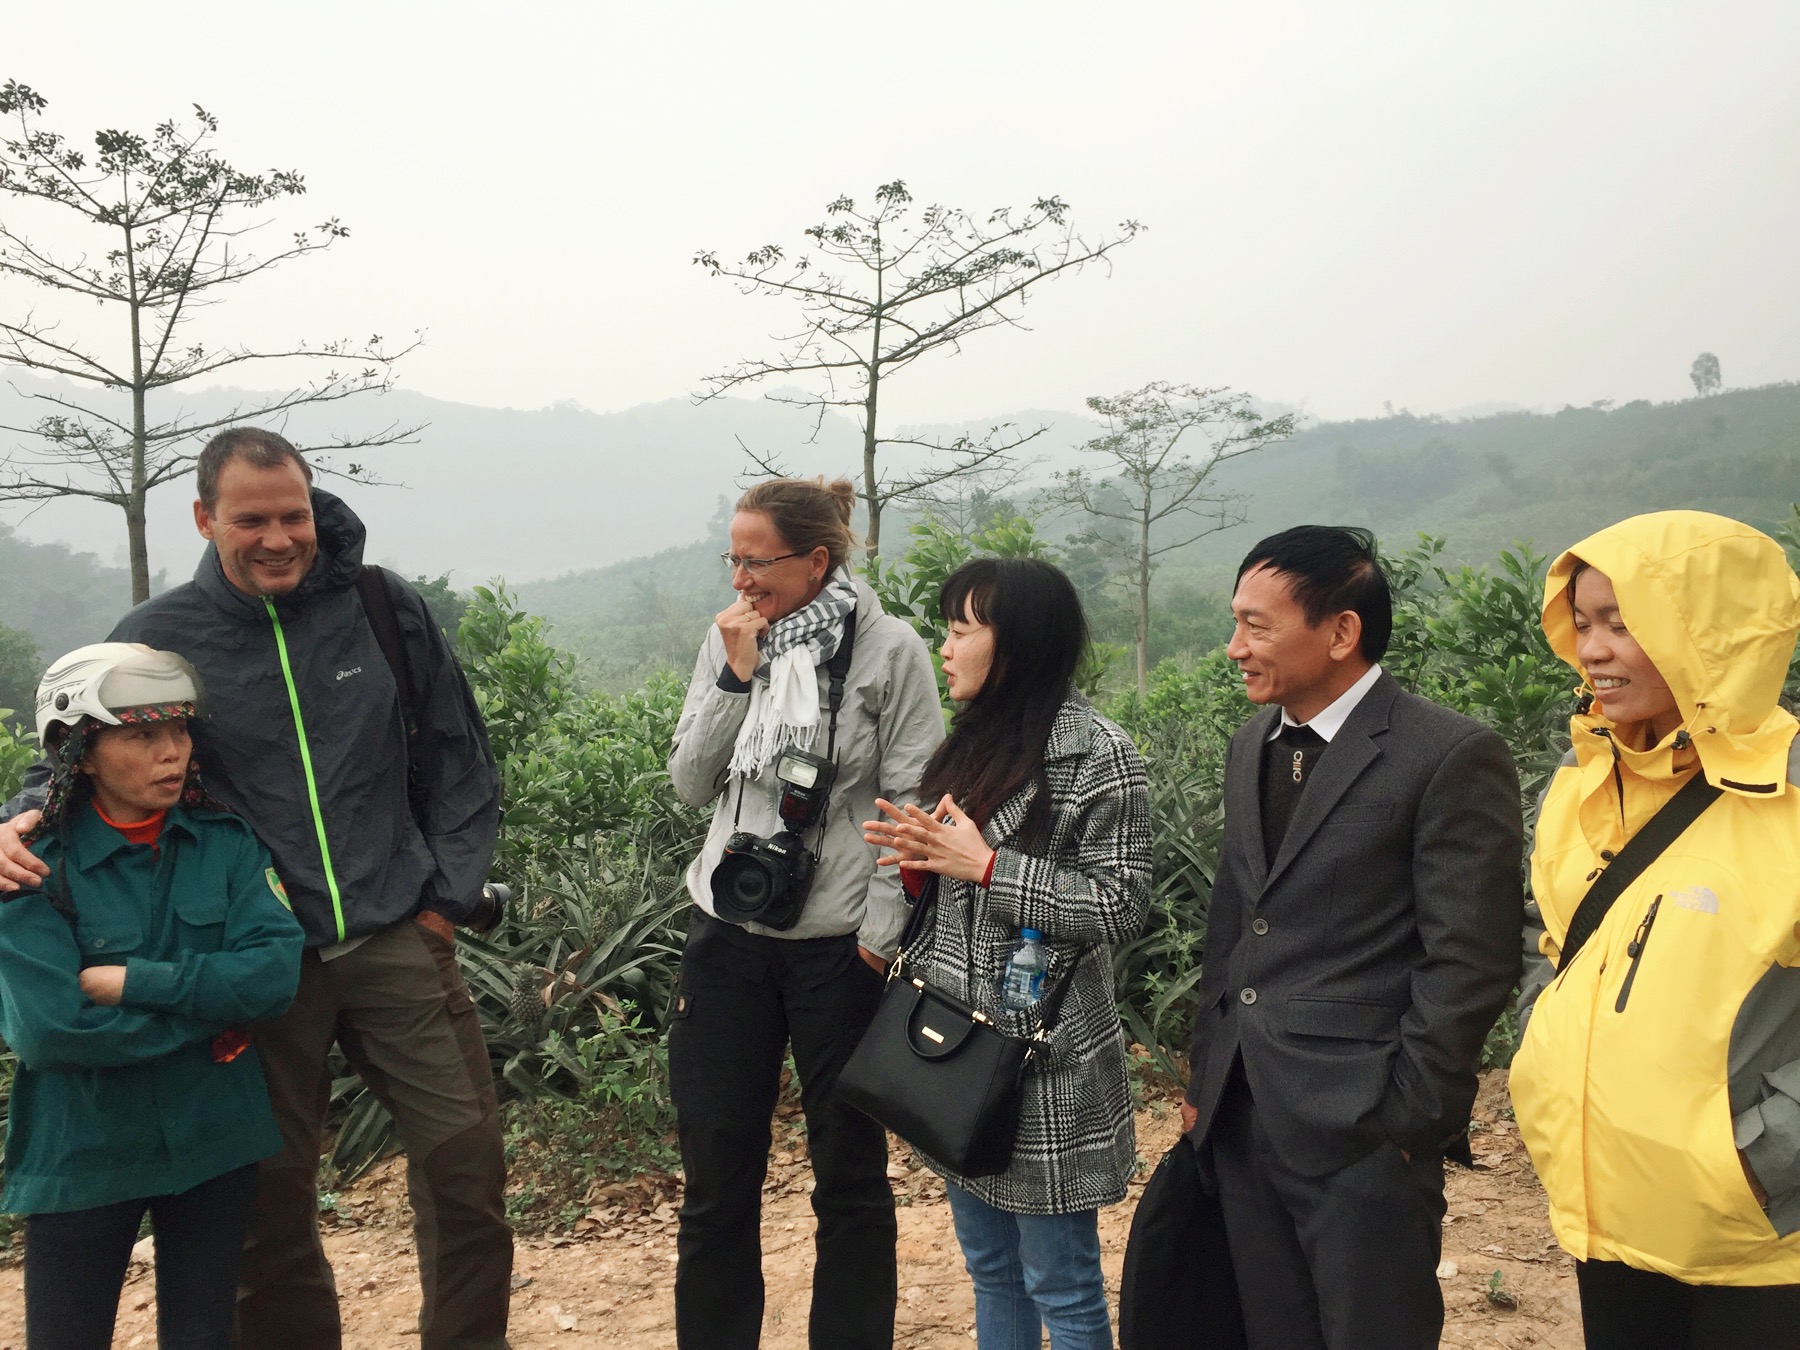 Rabobank visits the value chain of Quynh Luu